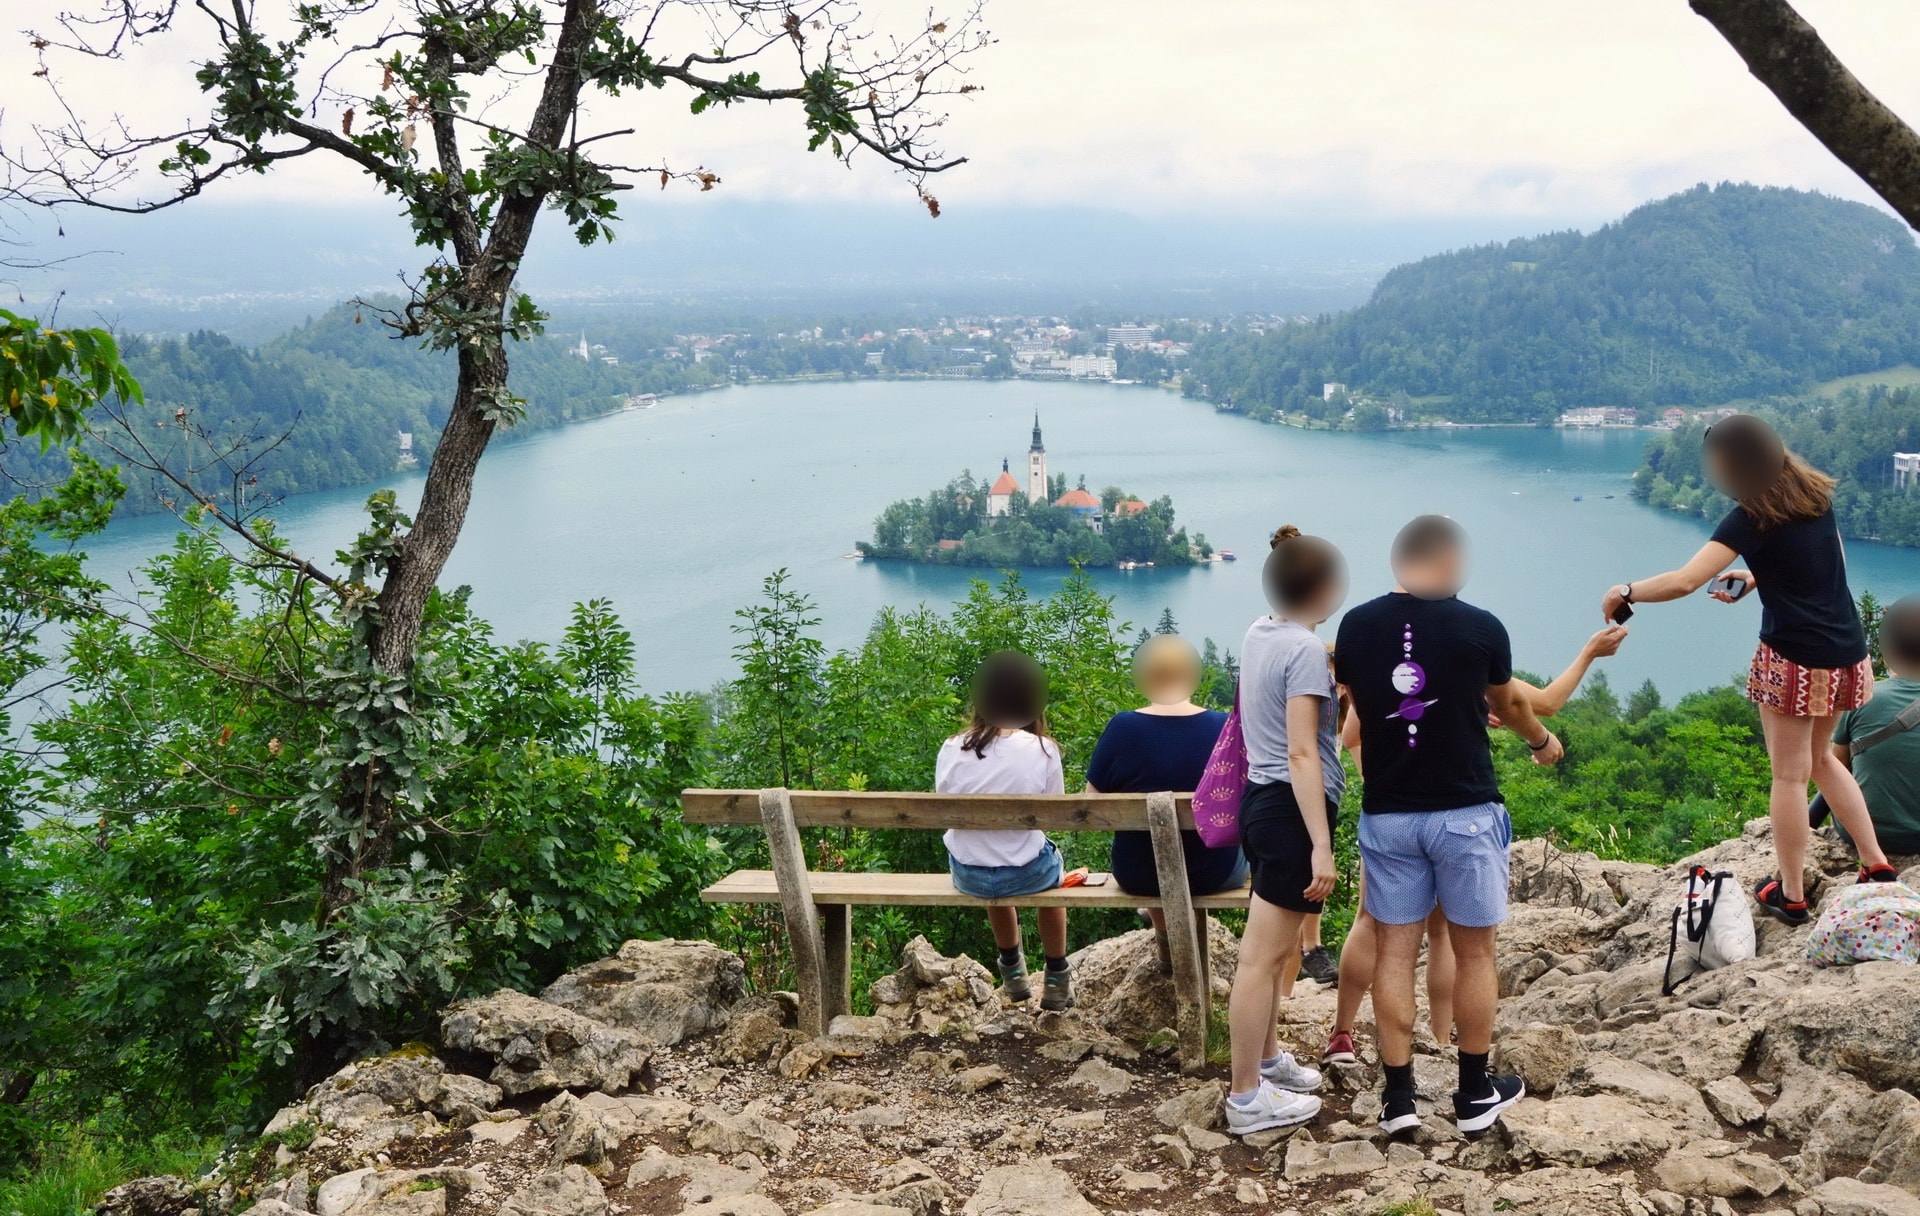 Ojstrica viewpoint above Lake Bled